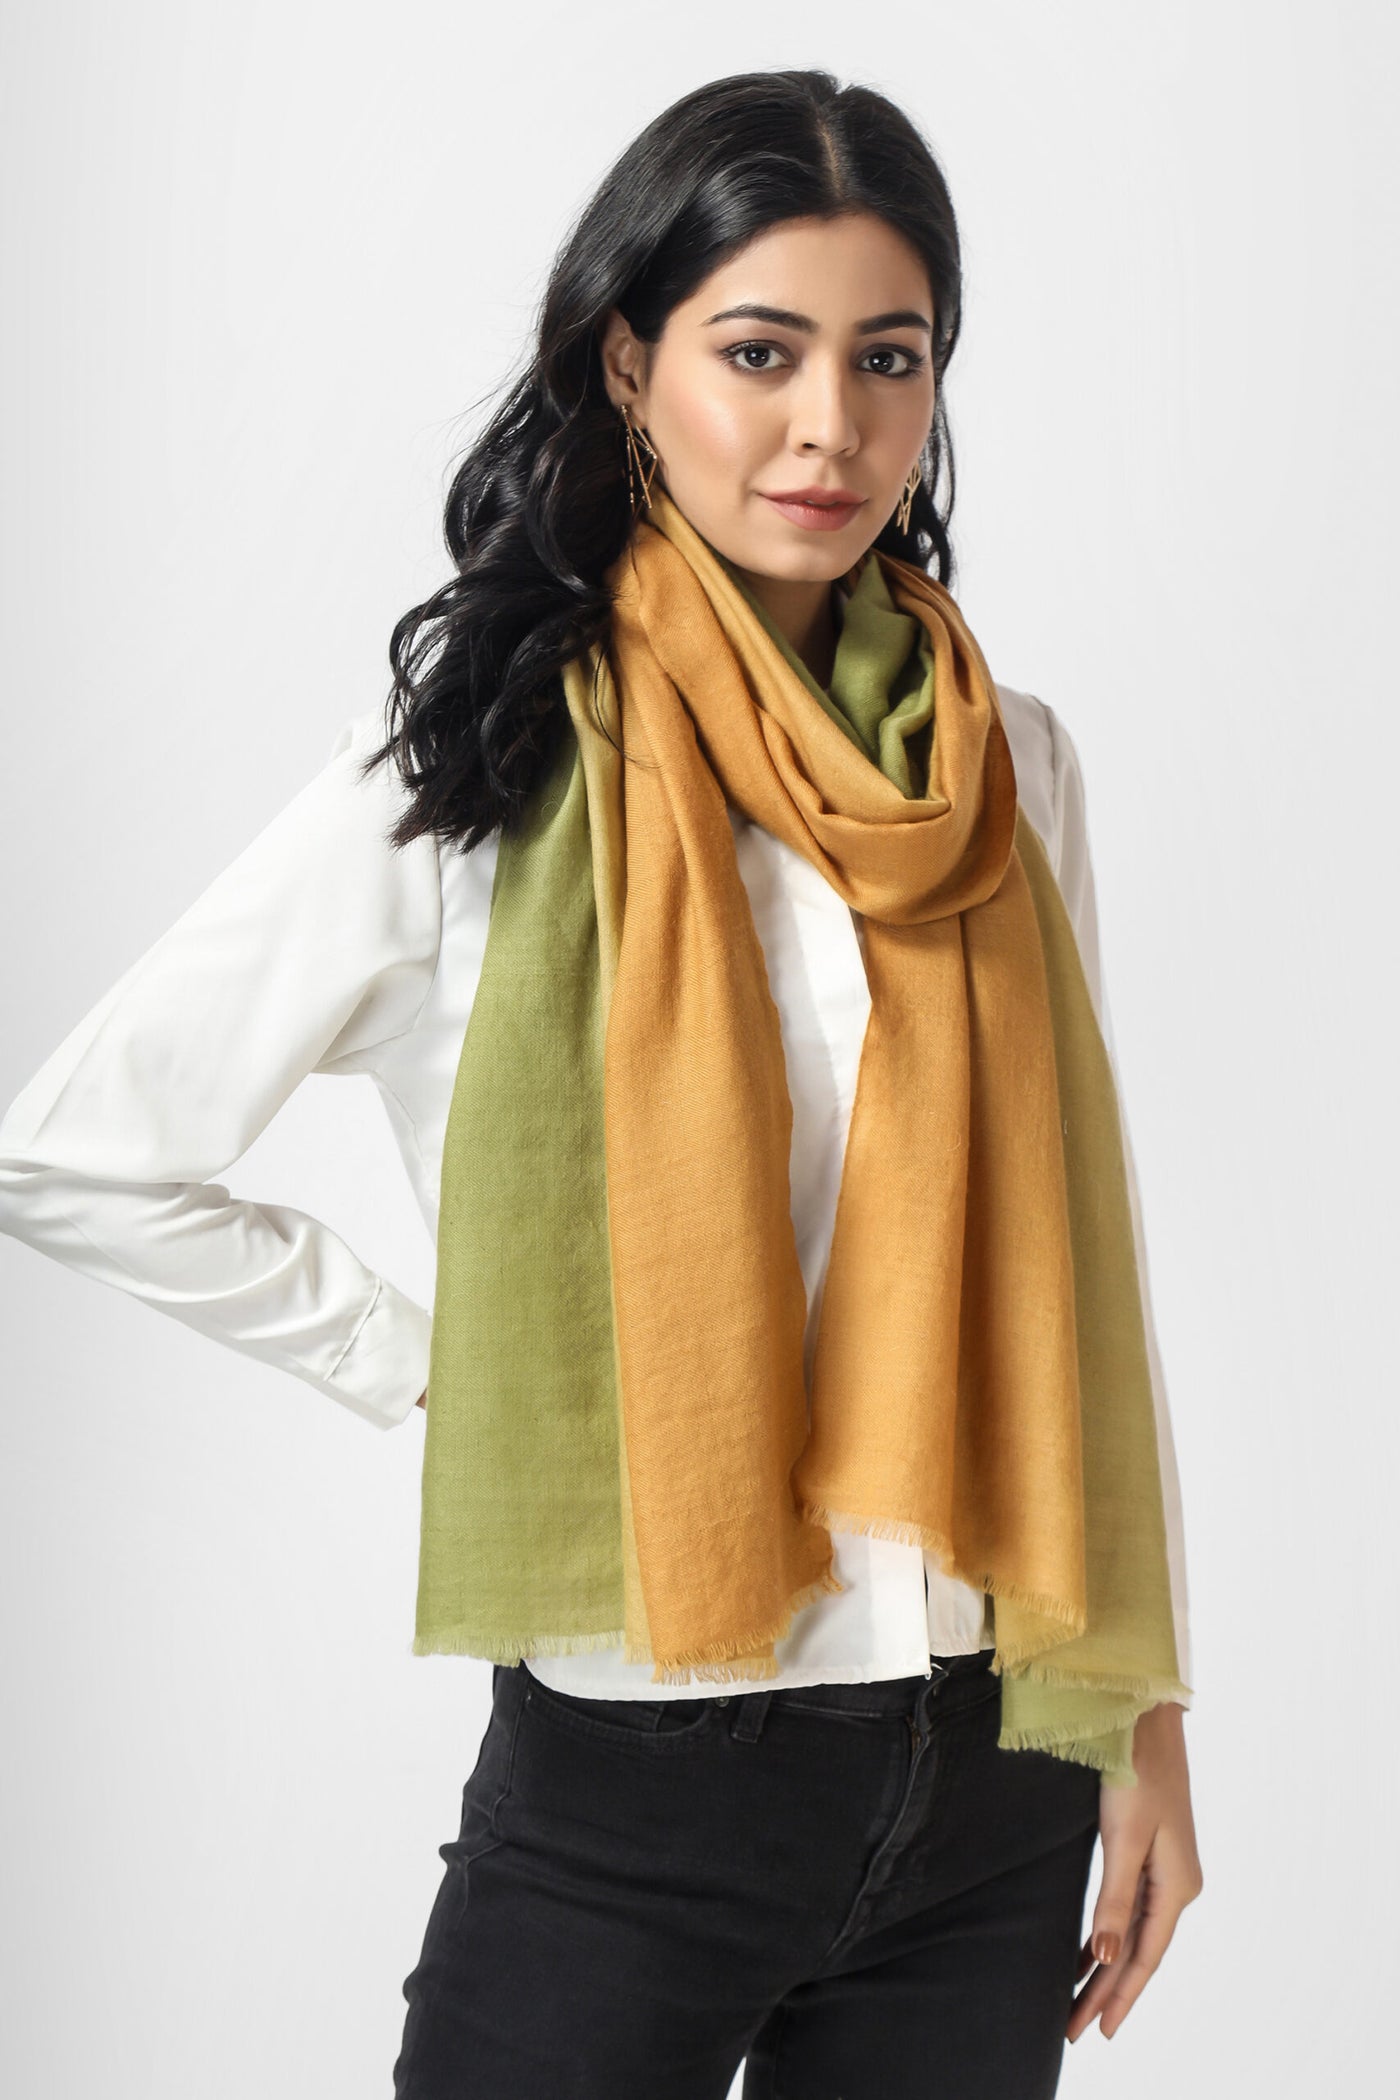 This ombre Pashmina stole Wrap is made of Pashmina fibres in lovely shades of olive green and light orange that would go well with any attire you choose to wear.  Wrap yourself in one of these stunning, genuine, ombre pashminas to set your look apart from the herd.